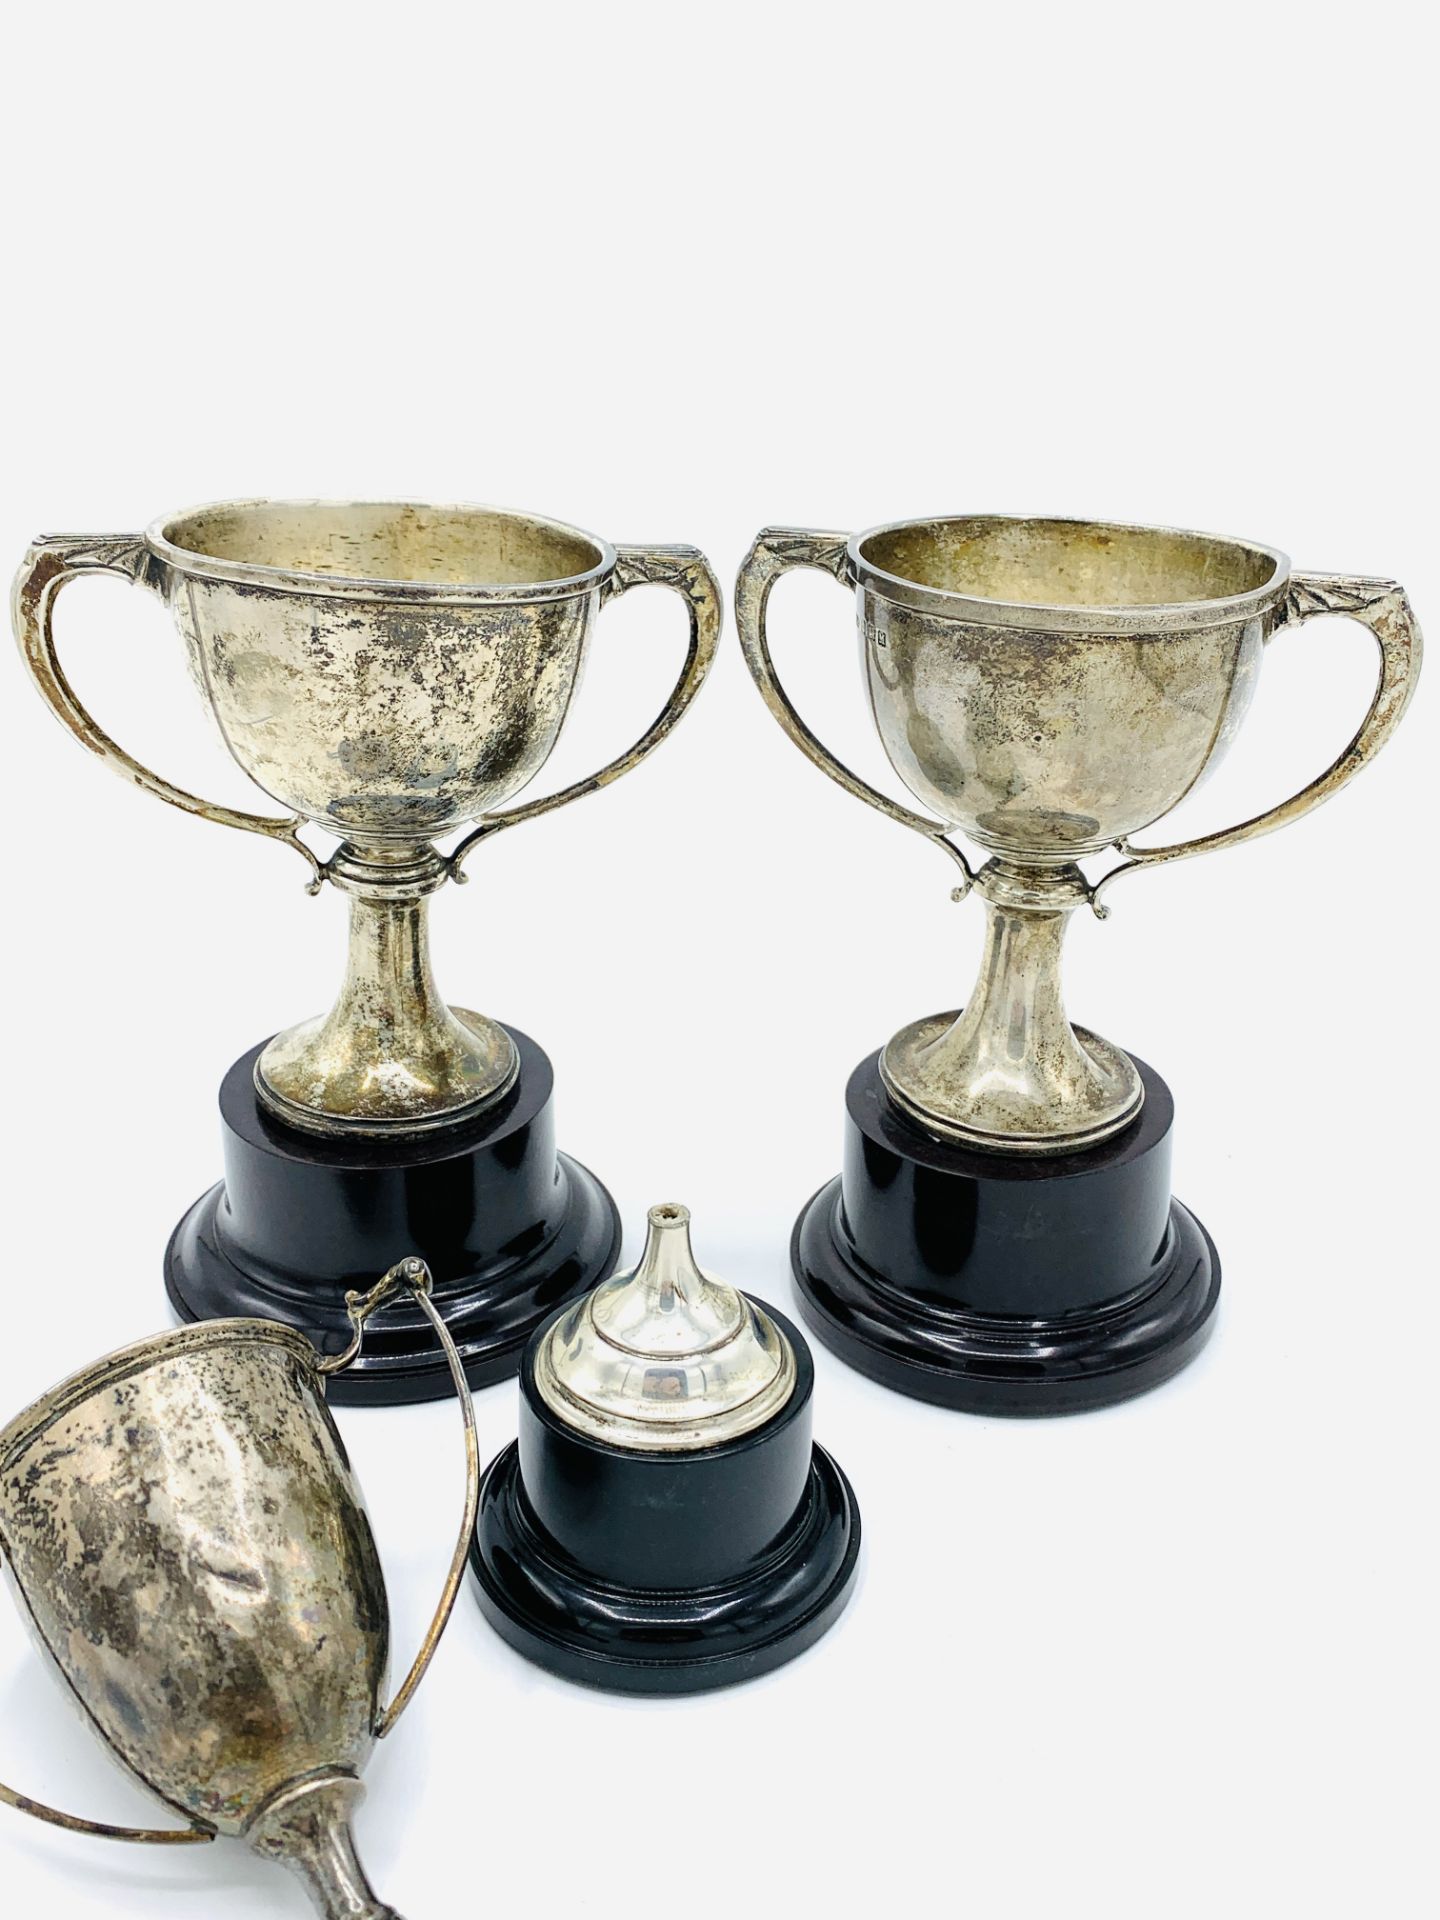 Two hallmarked silver 1930s 2 handled trophies, and a silver trophy with broken stem